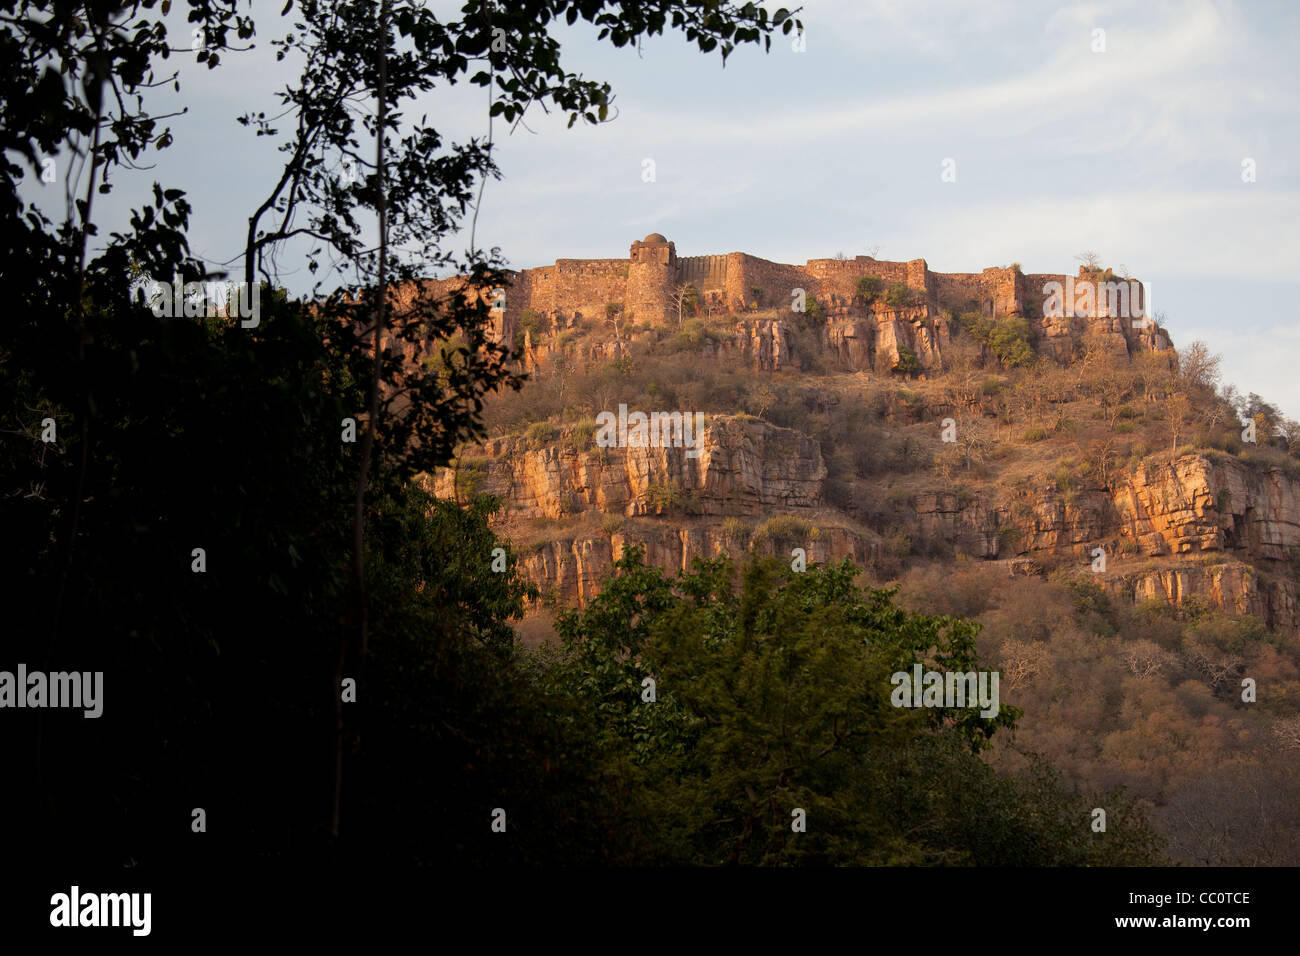 Ranthambore Fort heritage site in Rajasthan, Northern India Stock Photo